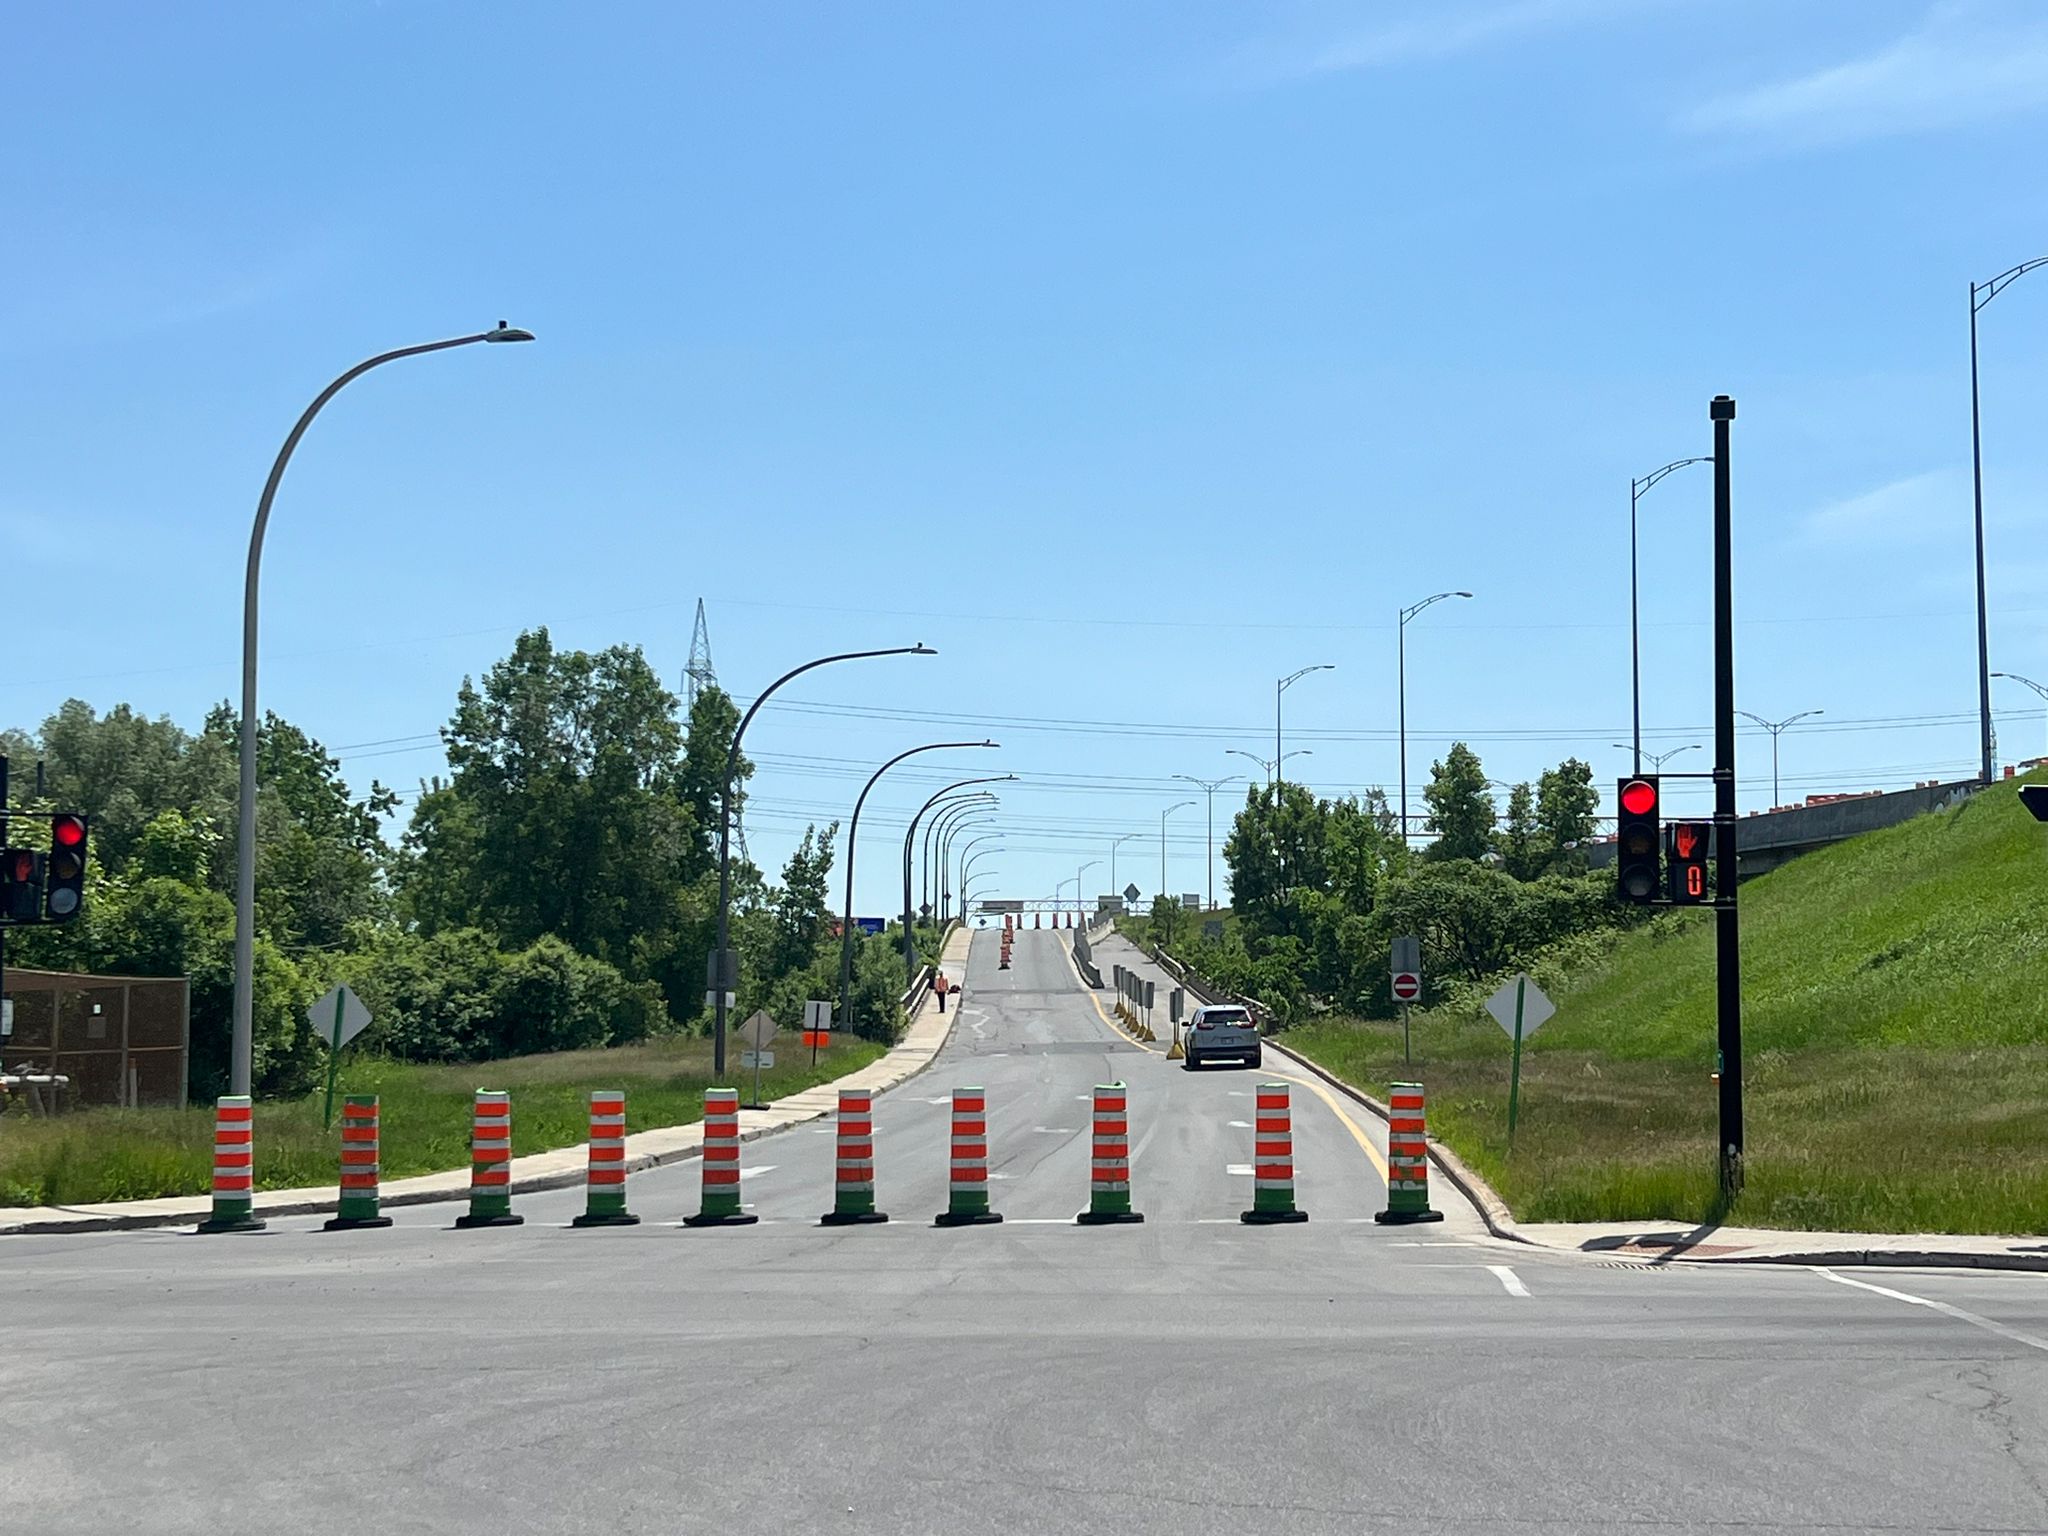 ‘It’s absolute chaos’: Indefinite bridge closures spark outrage in Montreal’s West Island